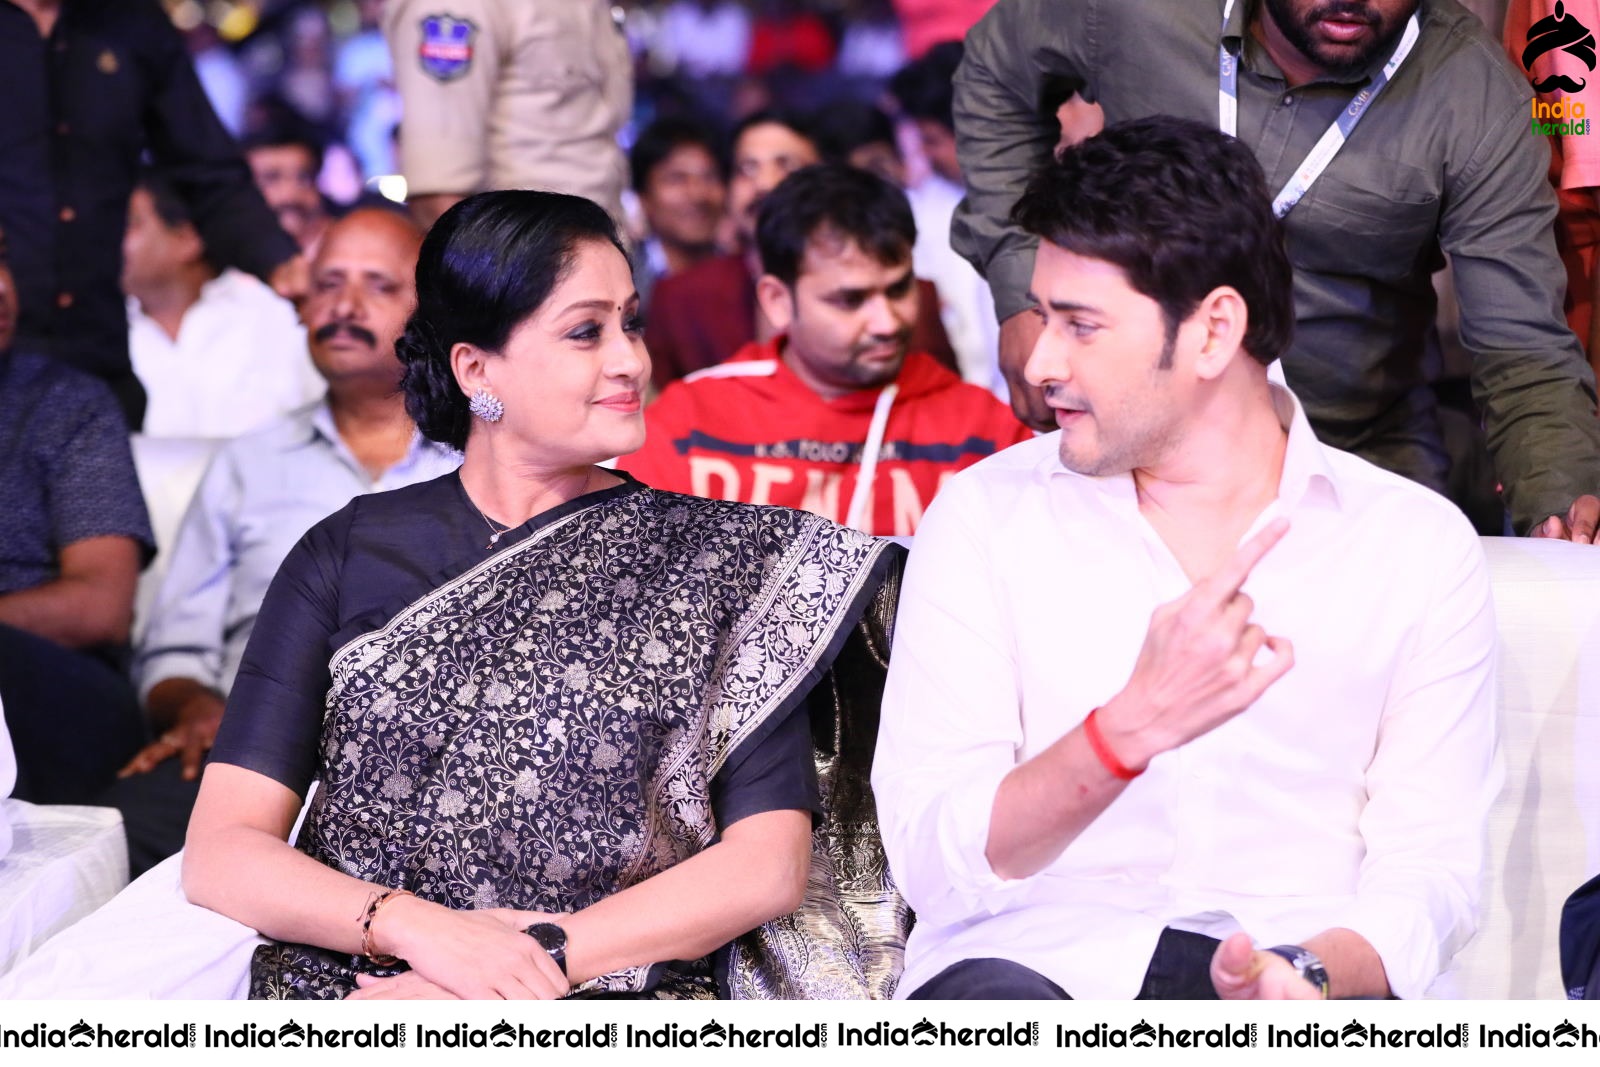 Actor Mahesh Babu seen with Vijayshanthi and having a chit chat session